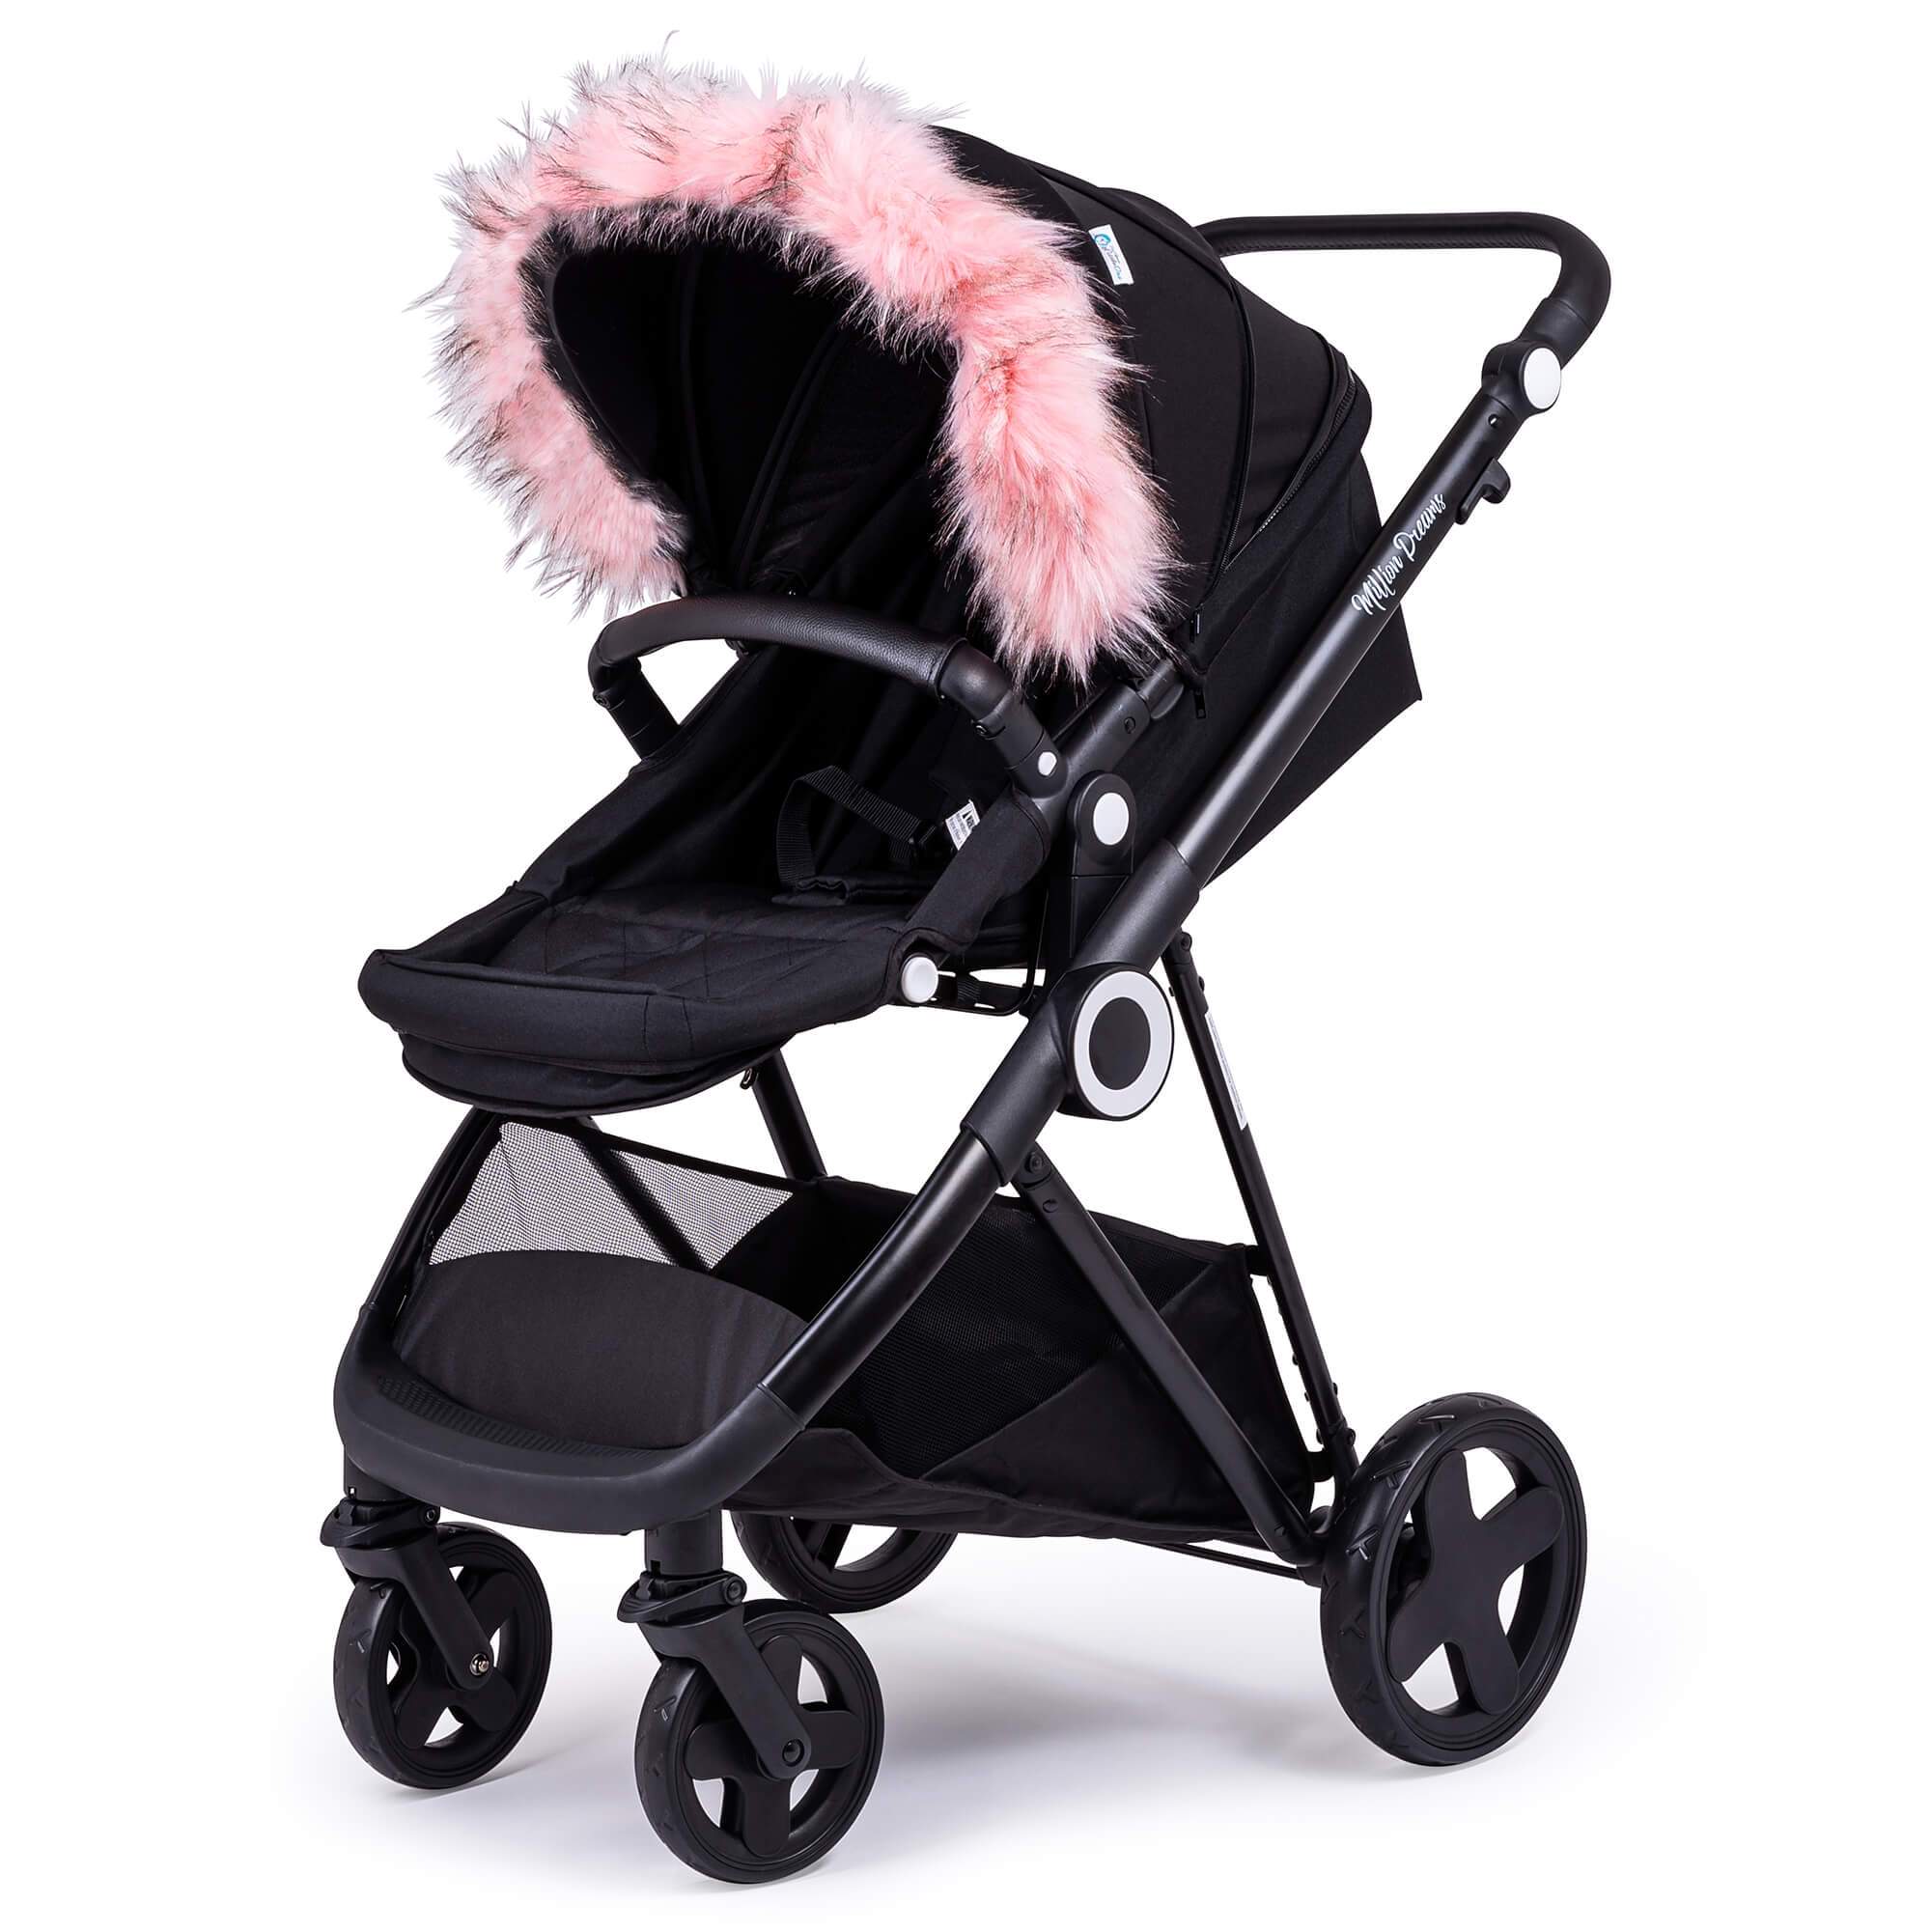 Pram Fur Hood Trim Attachment for Pushchair Compatible with Nania - Light Pink / Fits All Models | For Your Little One